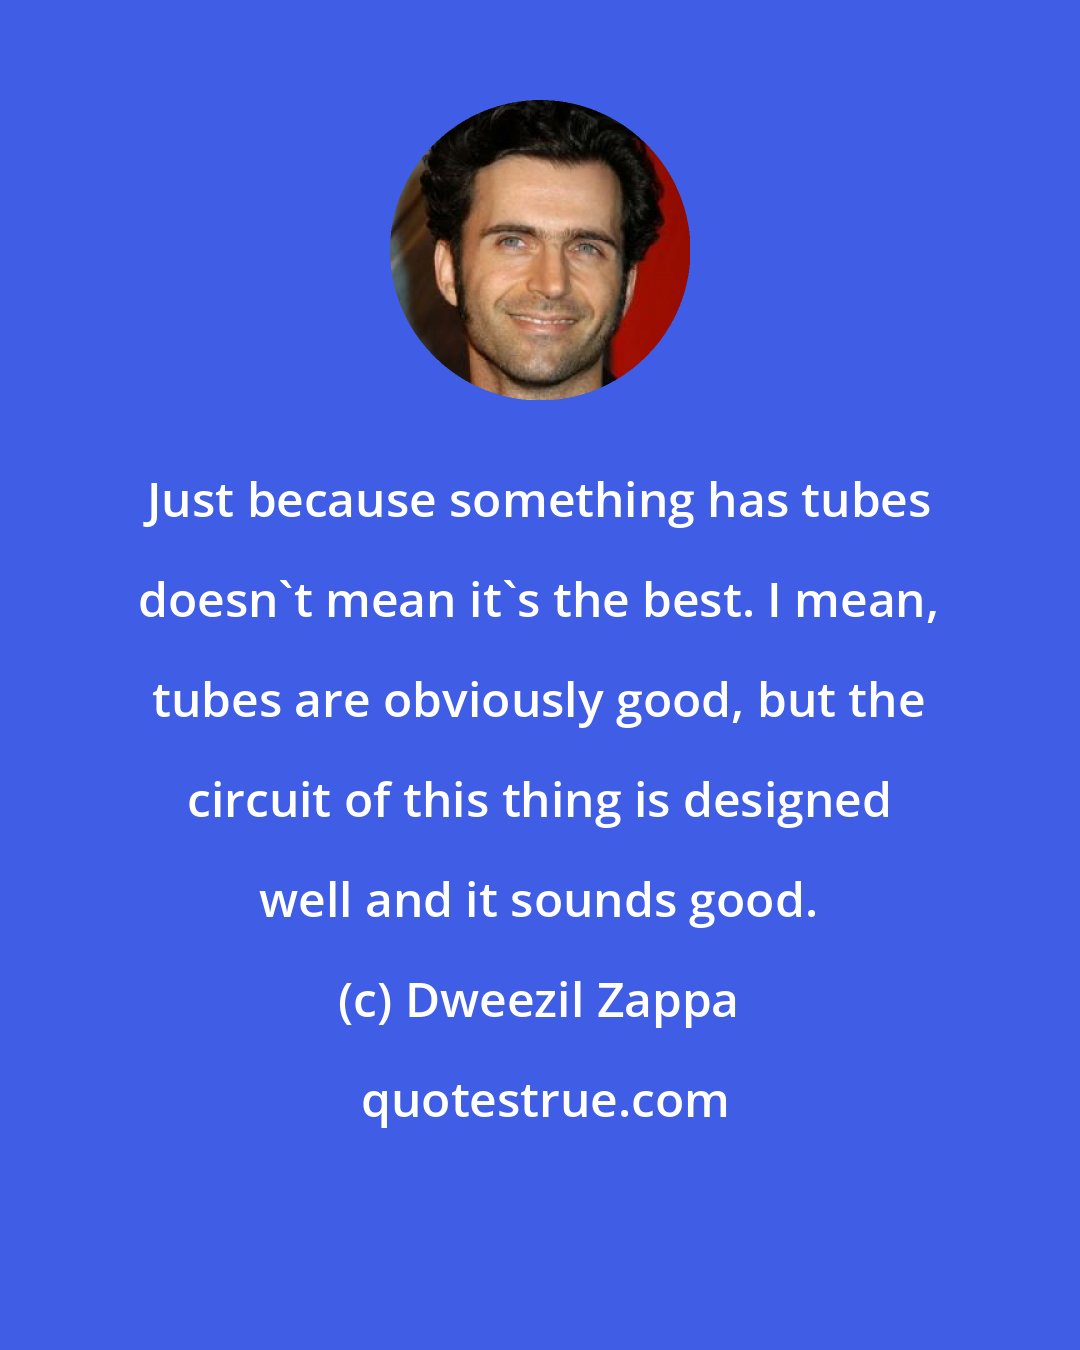 Dweezil Zappa: Just because something has tubes doesn't mean it's the best. I mean, tubes are obviously good, but the circuit of this thing is designed well and it sounds good.